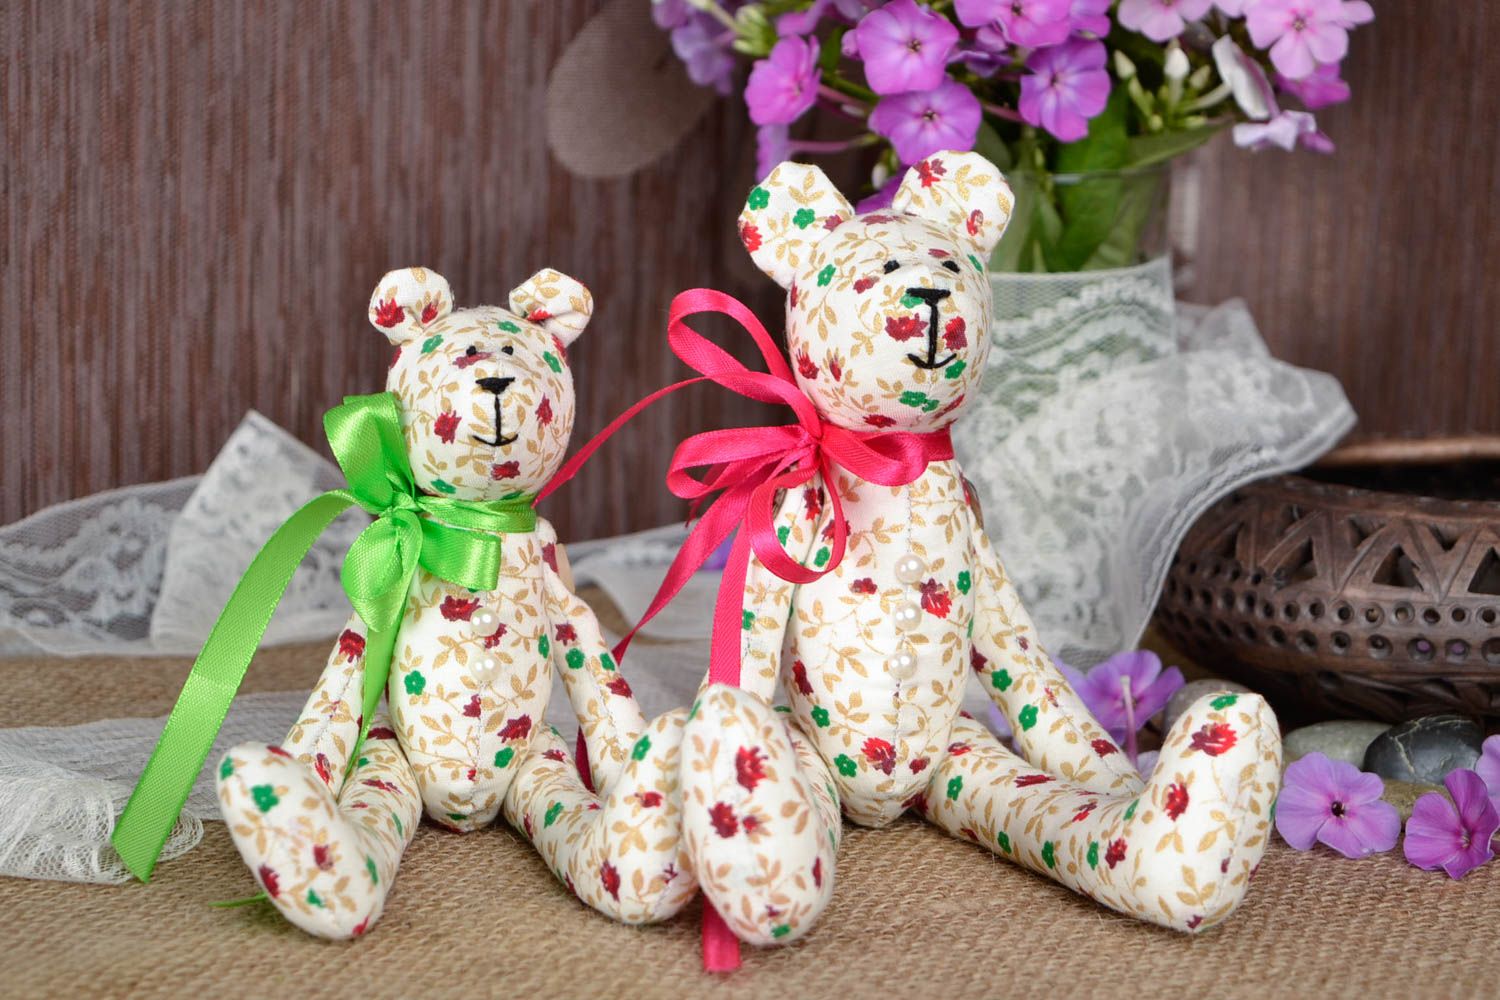 Bear toys handmade toys soft toys stuffed animals unique gifts for kids photo 1